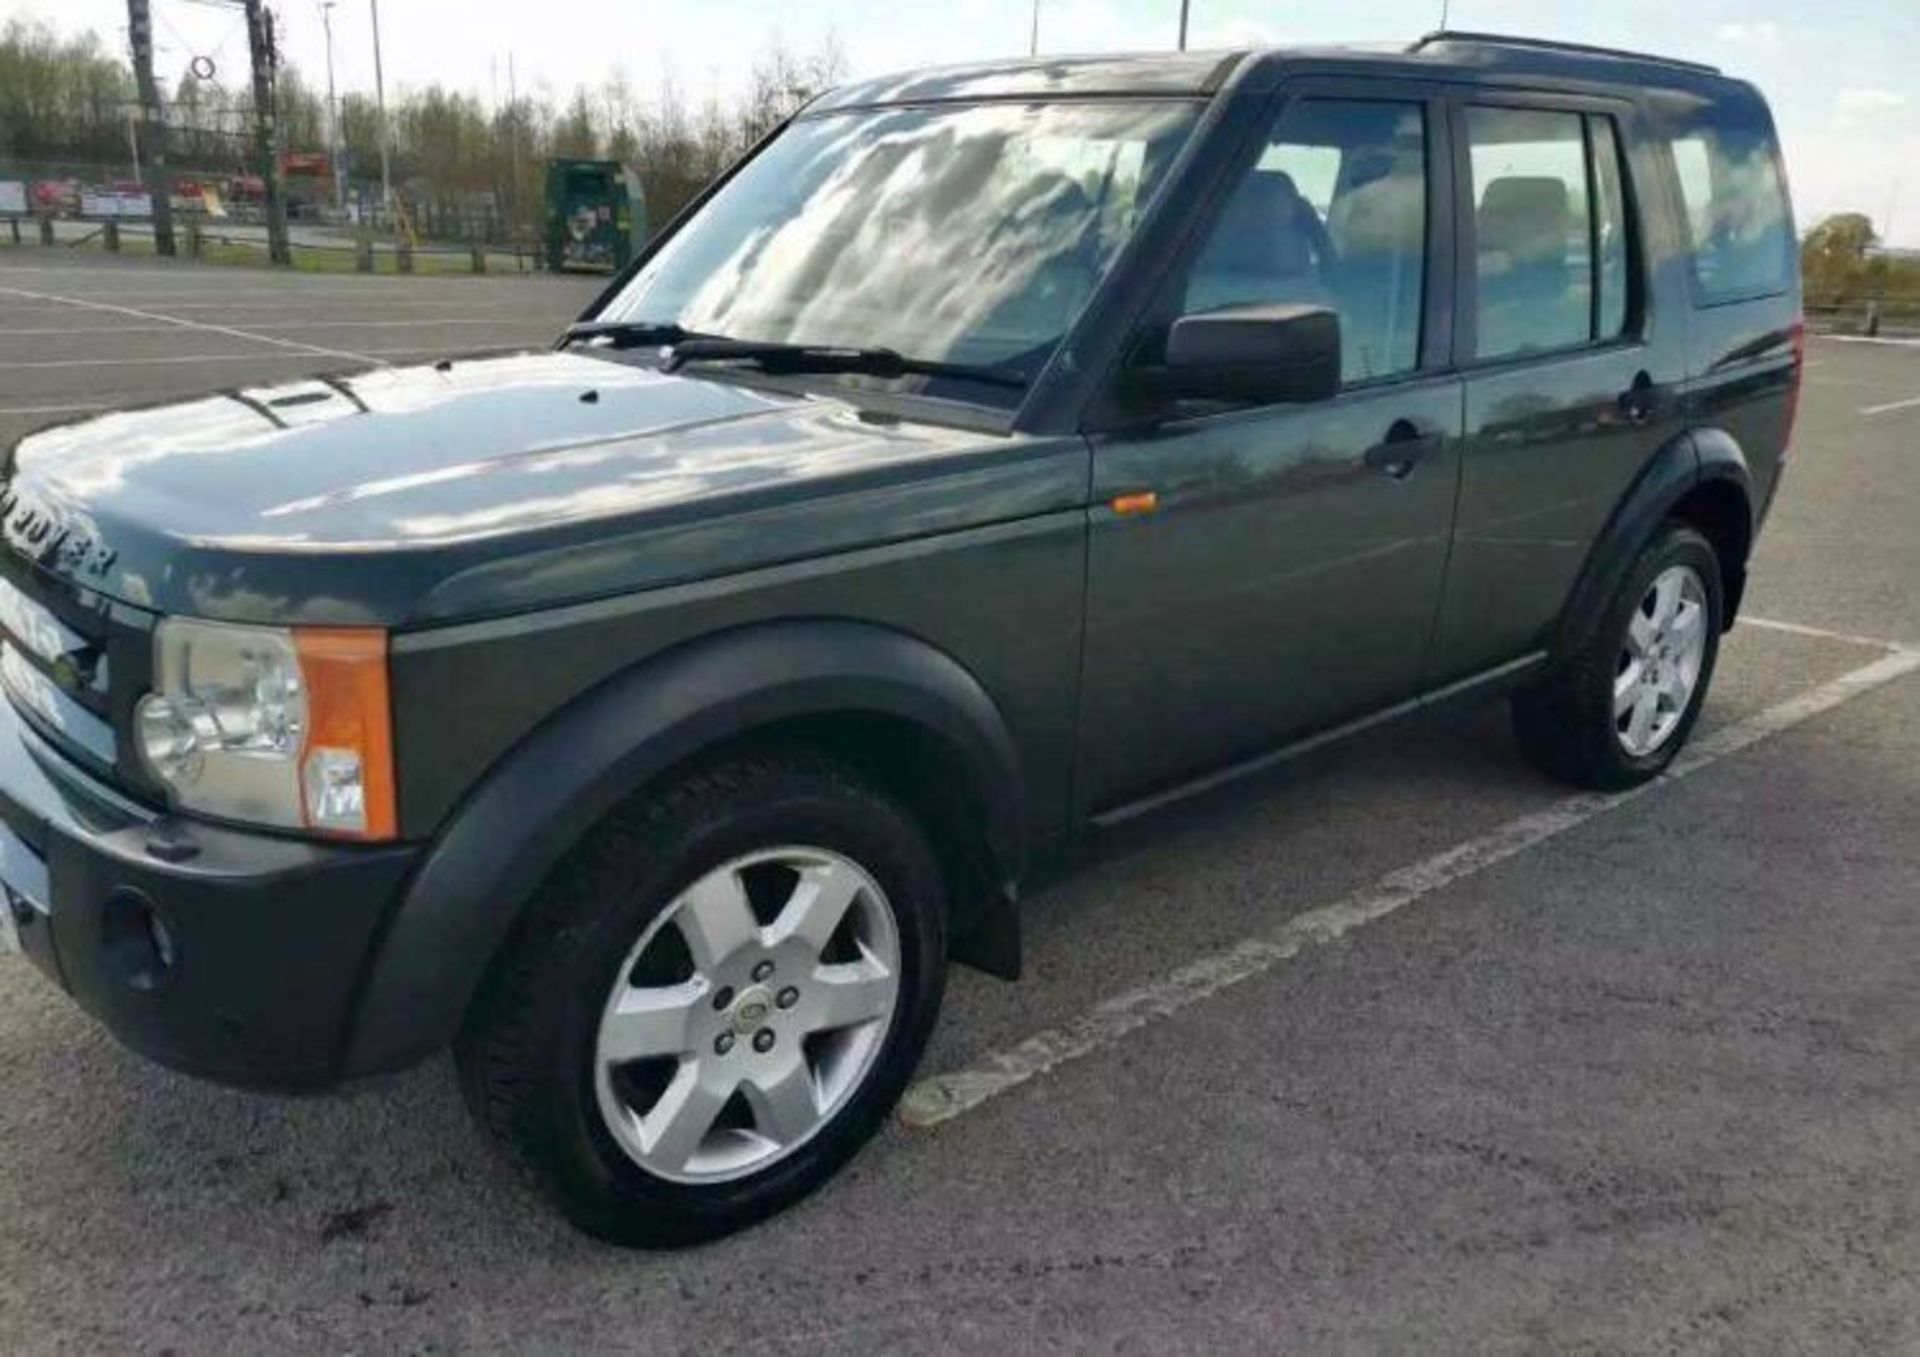 2006 LAND ROVER DISCOVERY 3 TDV6 AUTO GREEN ESTATE - LEATHER SEATS *NO VAT* - Image 2 of 11